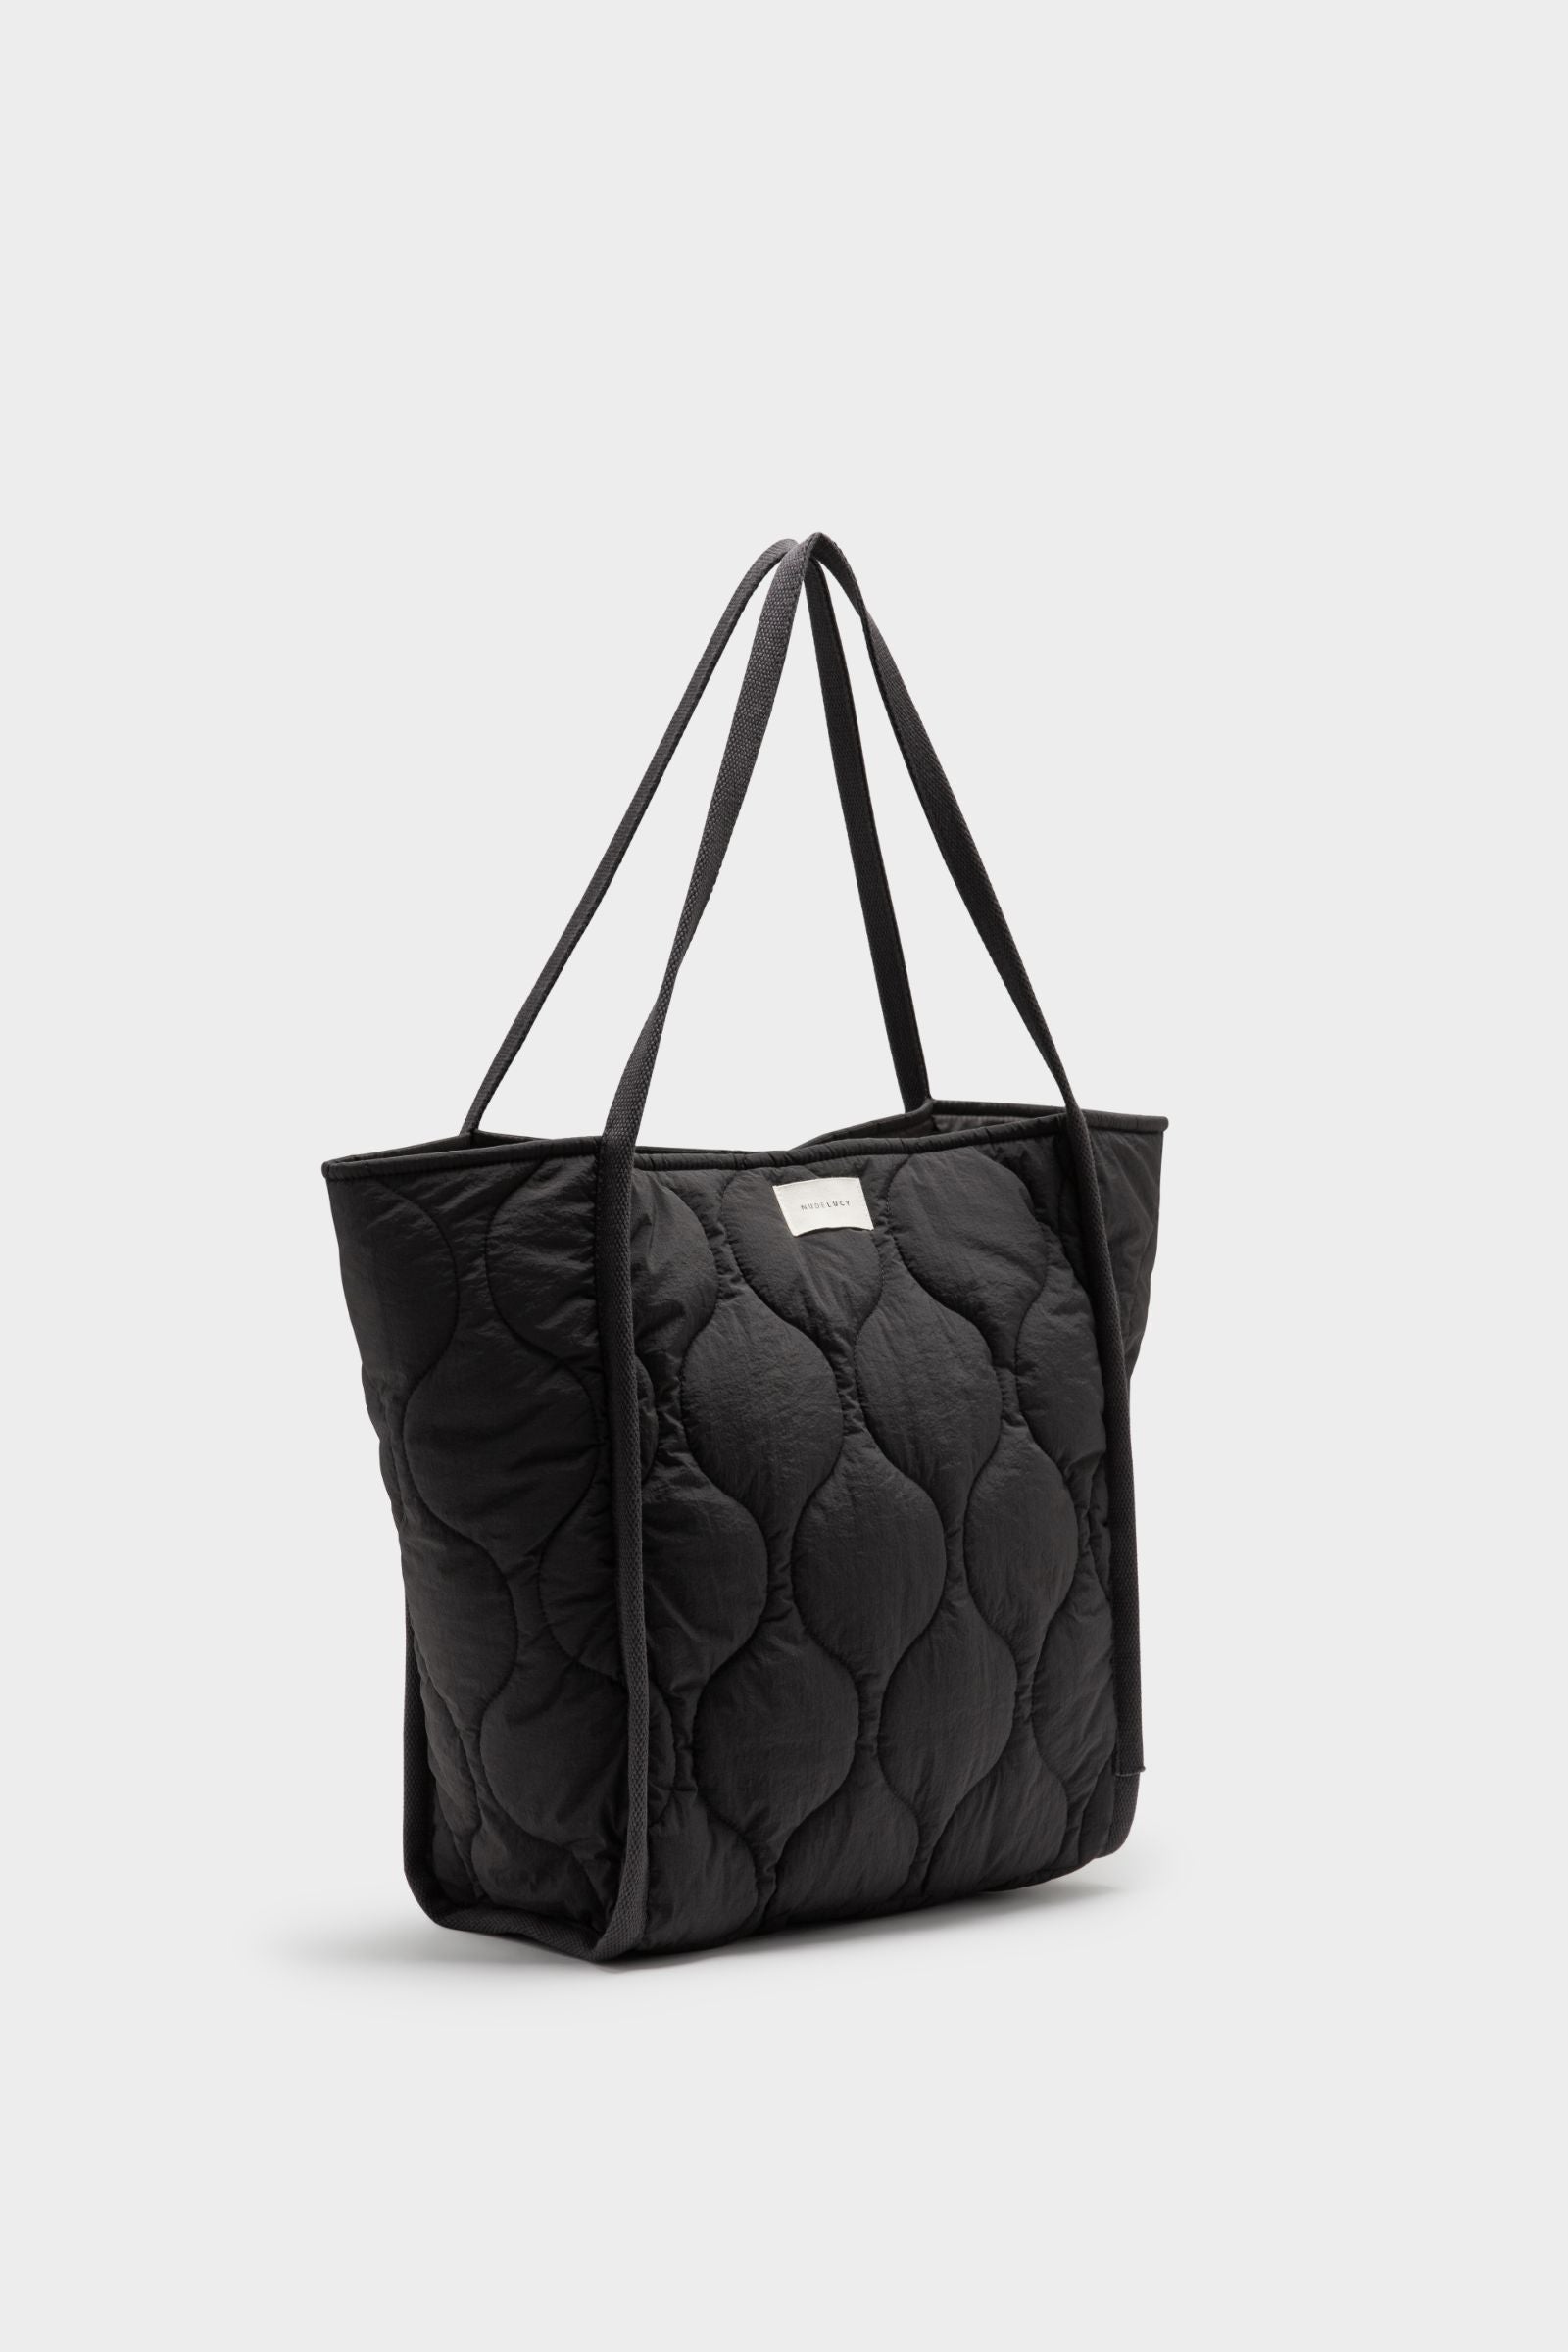 Nude Lucy Nude Puffer Tote In A Dark Grey In A Brown Coal Colour 